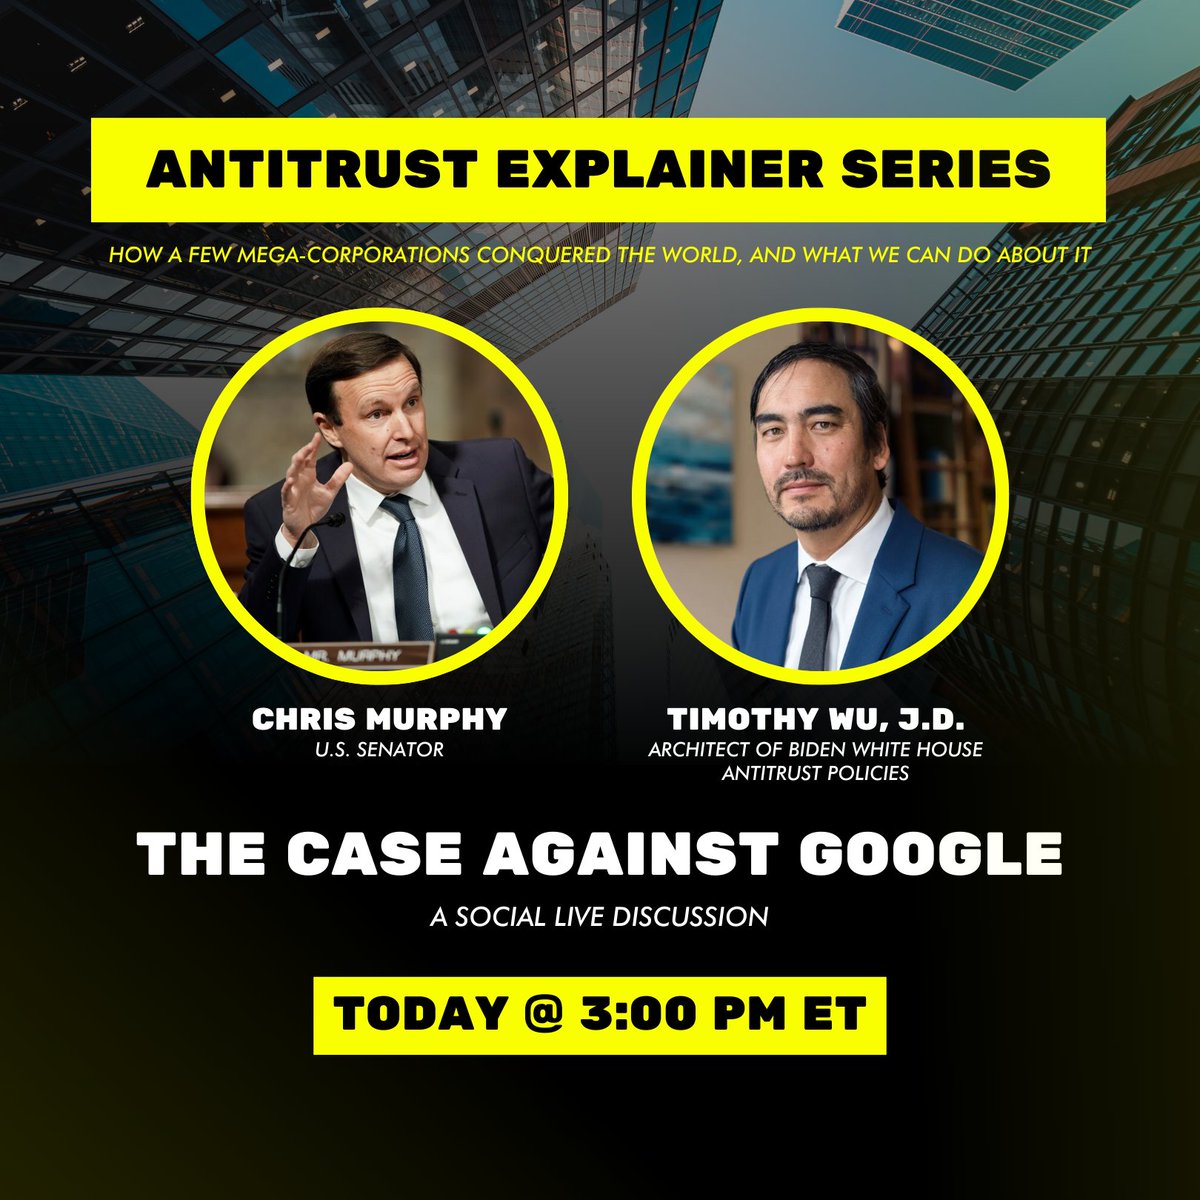 Today I'm holding my second in a series of explainers on the important work being done by the FTC and DoJ to break up concentrated, monopoly power. Today we will be talking with the one and only @superwuster about Google's market abuses. Tune in!